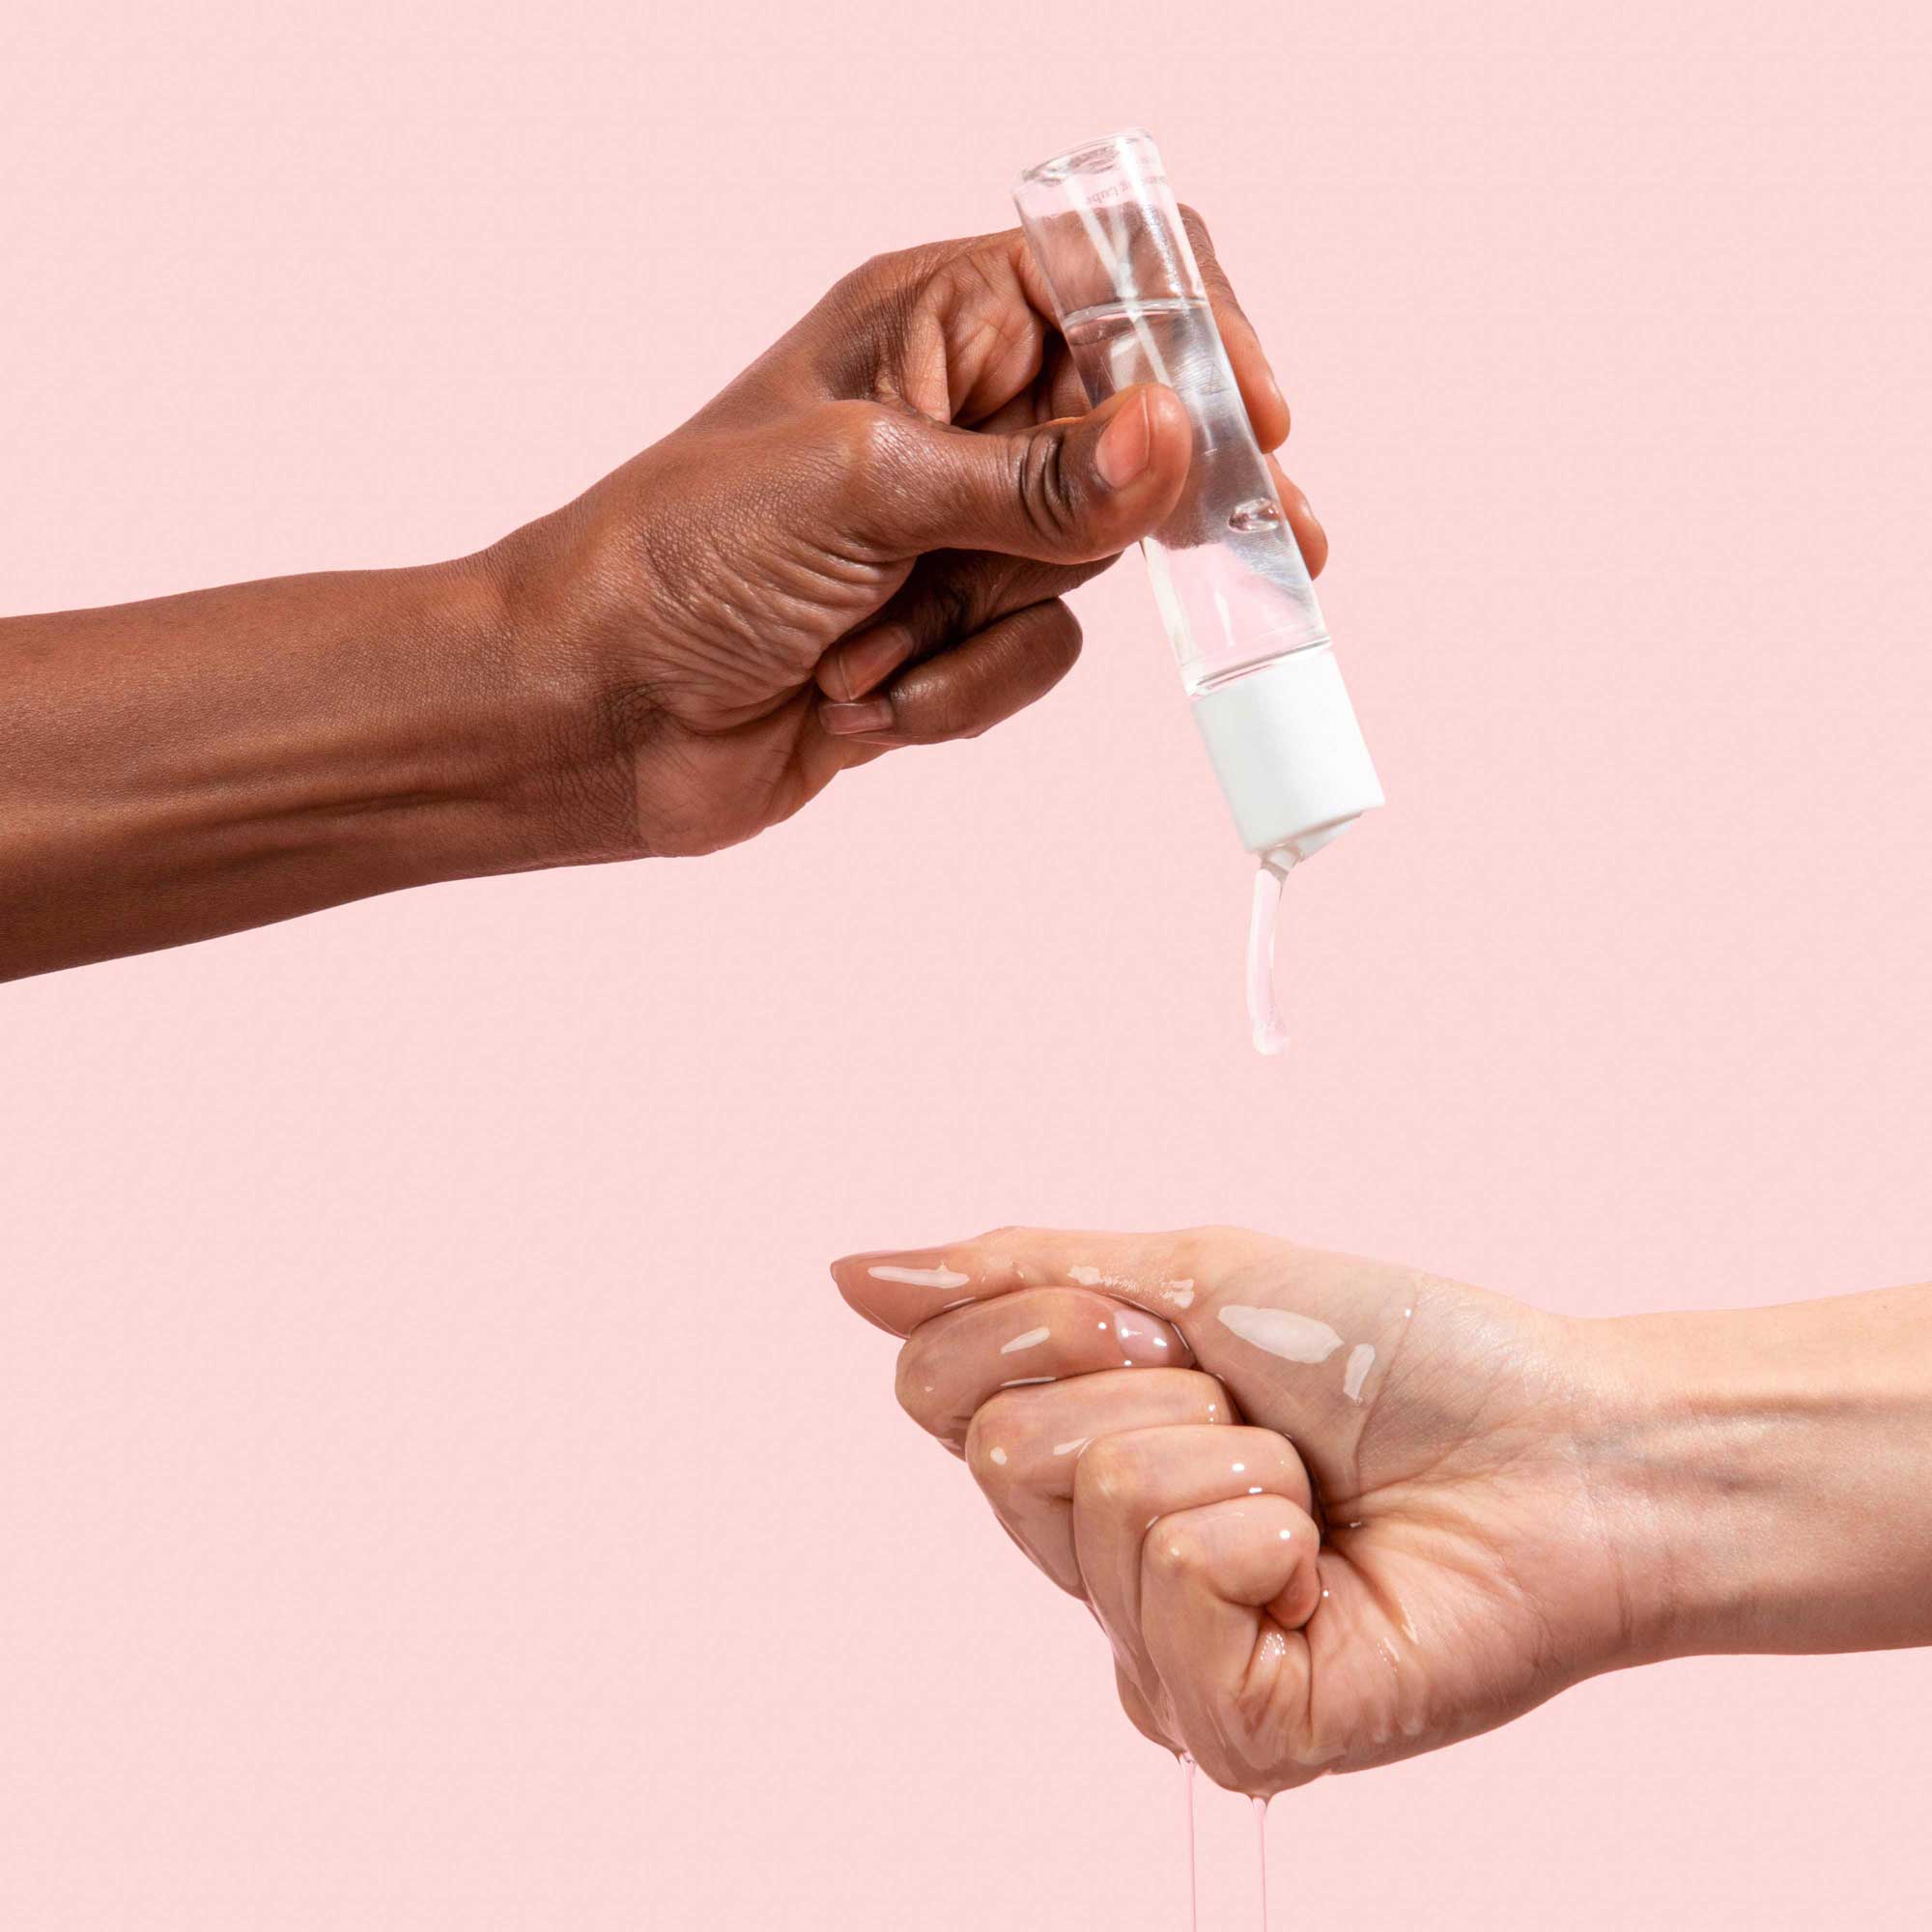 Female hand holding bottle of Wisp Harmonizing Lube and pouring lube onto other hand on pink background